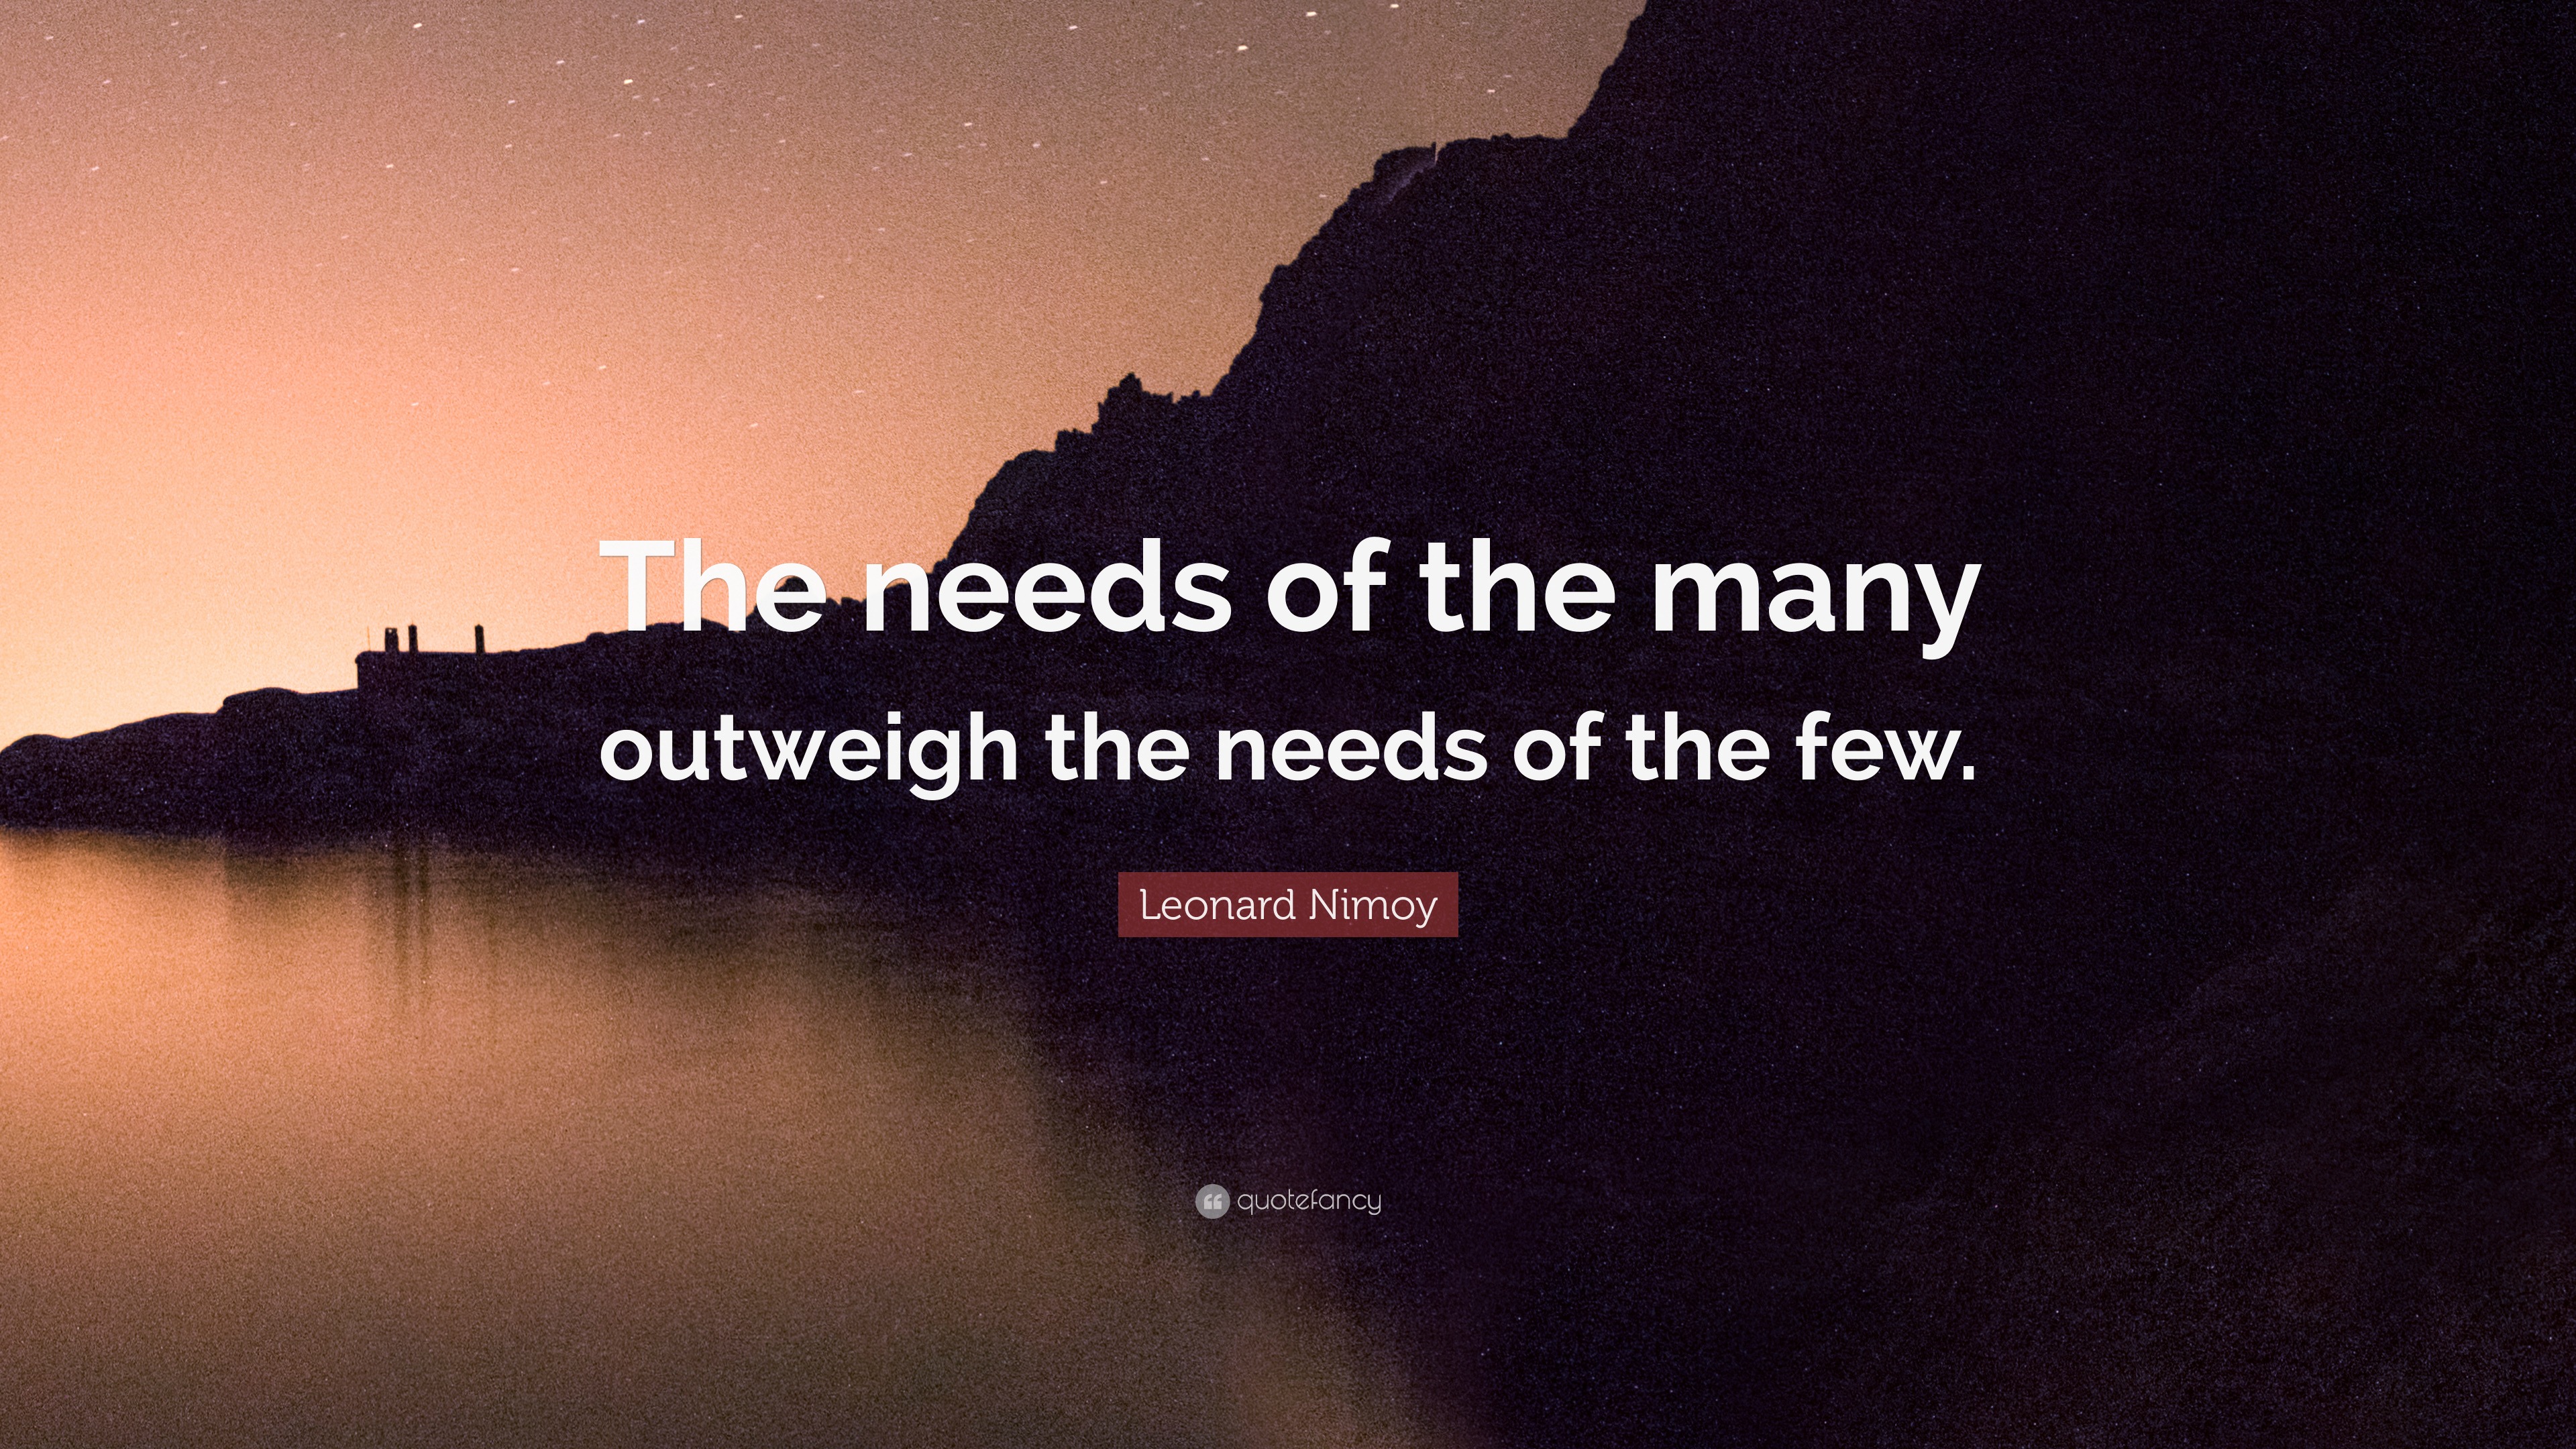 the needs of the many outweigh the needs of the few